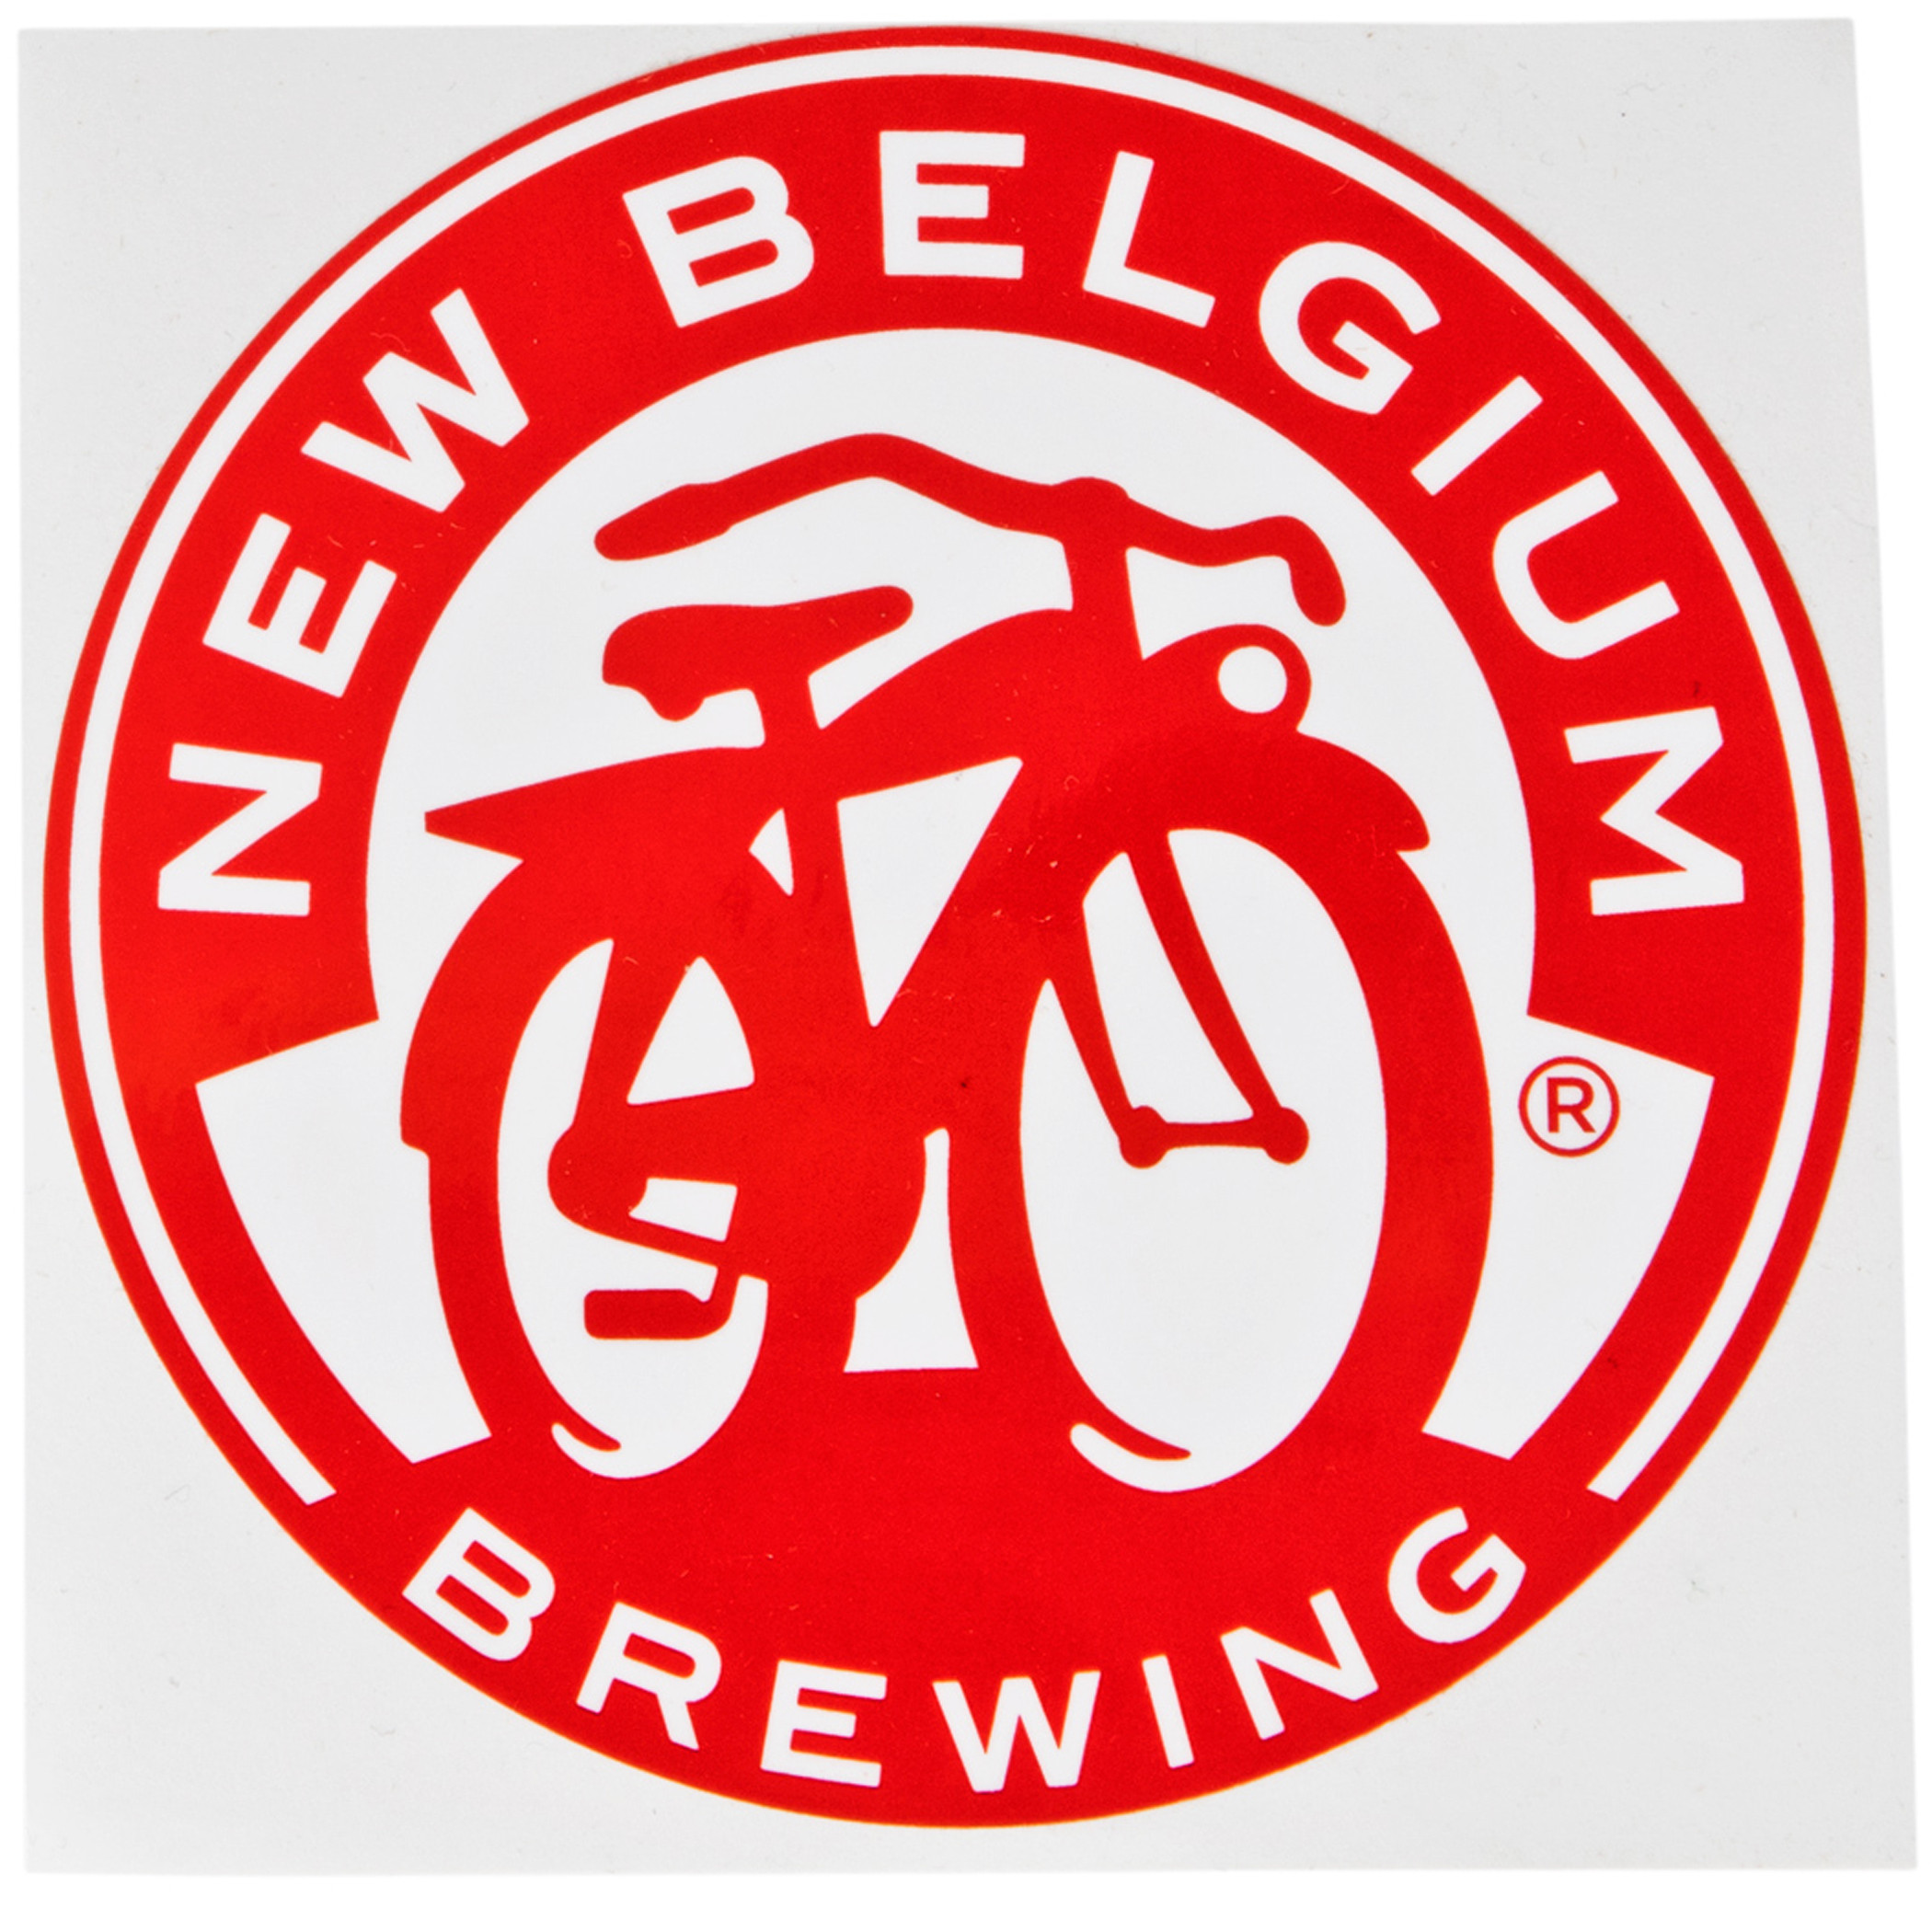 NEW BELGIUM BREWING Promo Sticker BICYCLE LOGO craft beer brewery Fat Tire 